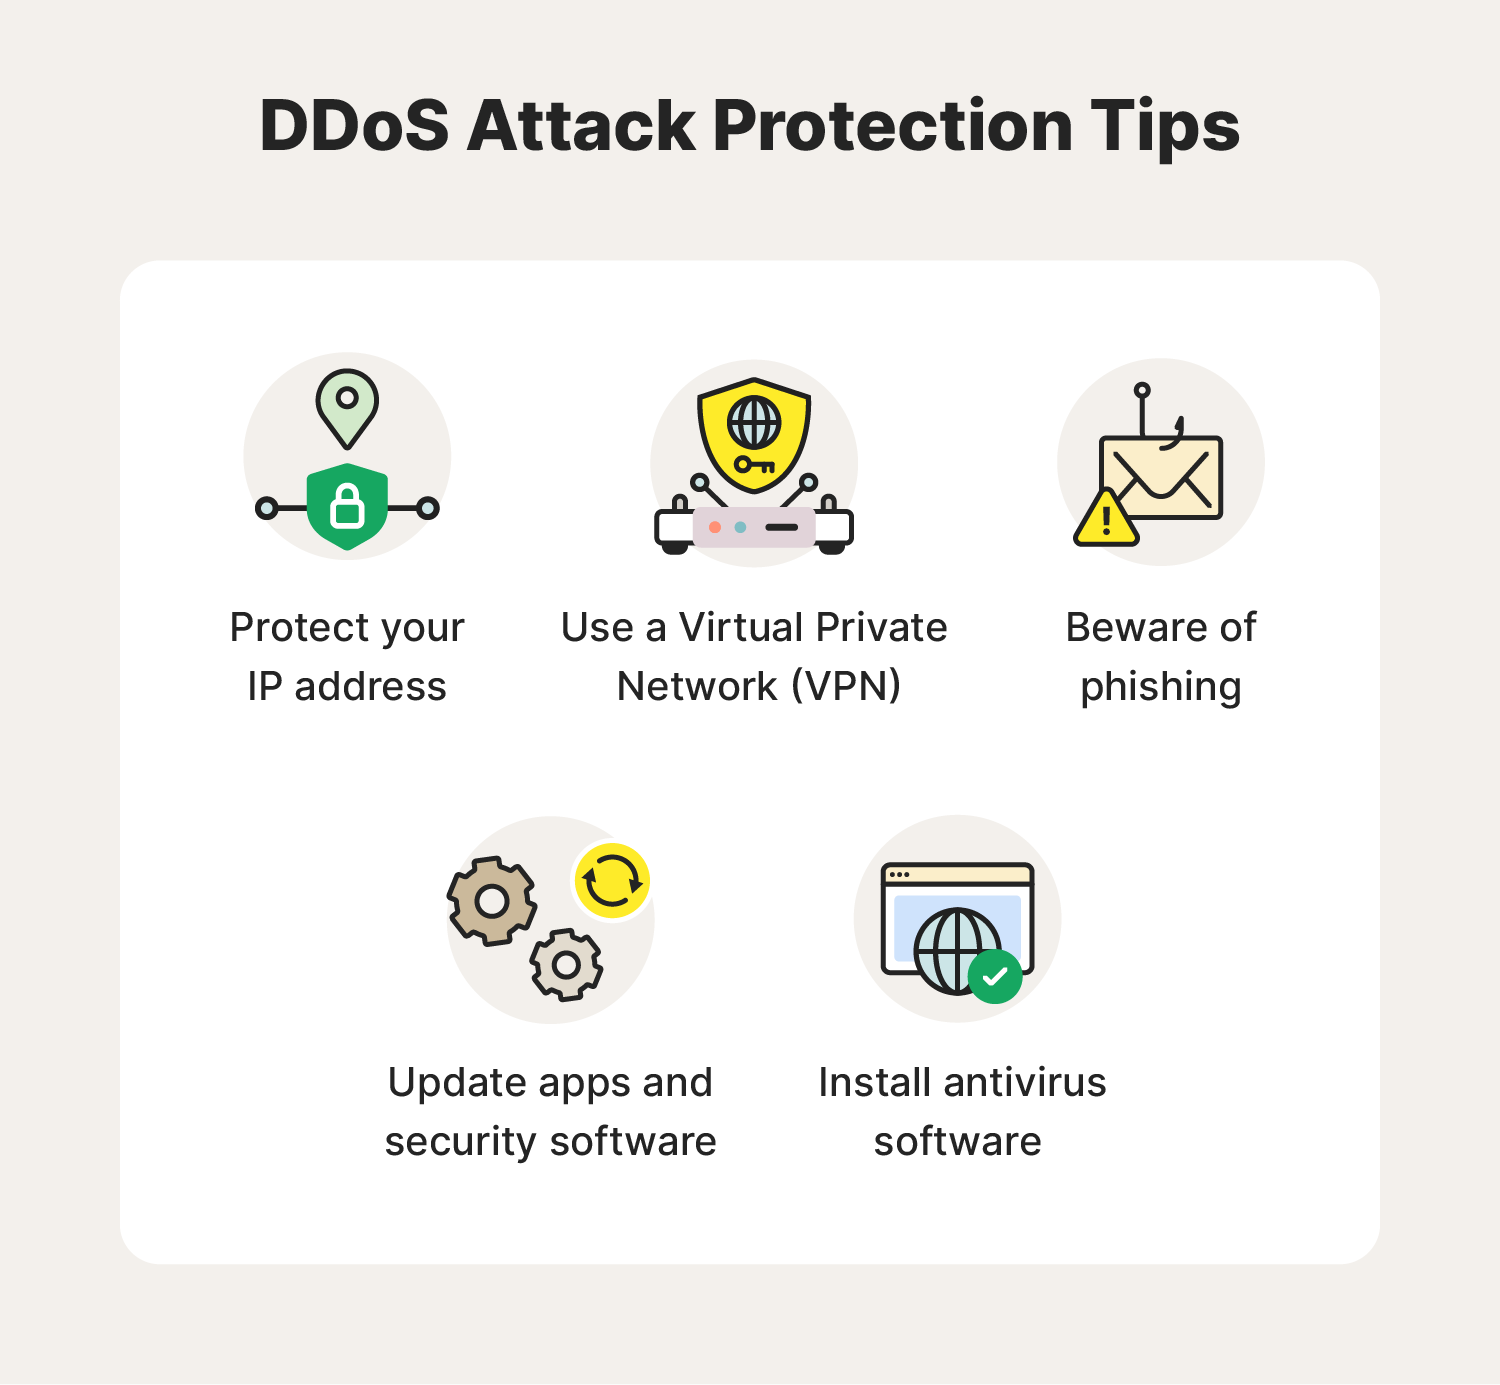 A graphic illustrates DDoS attack protection tips.